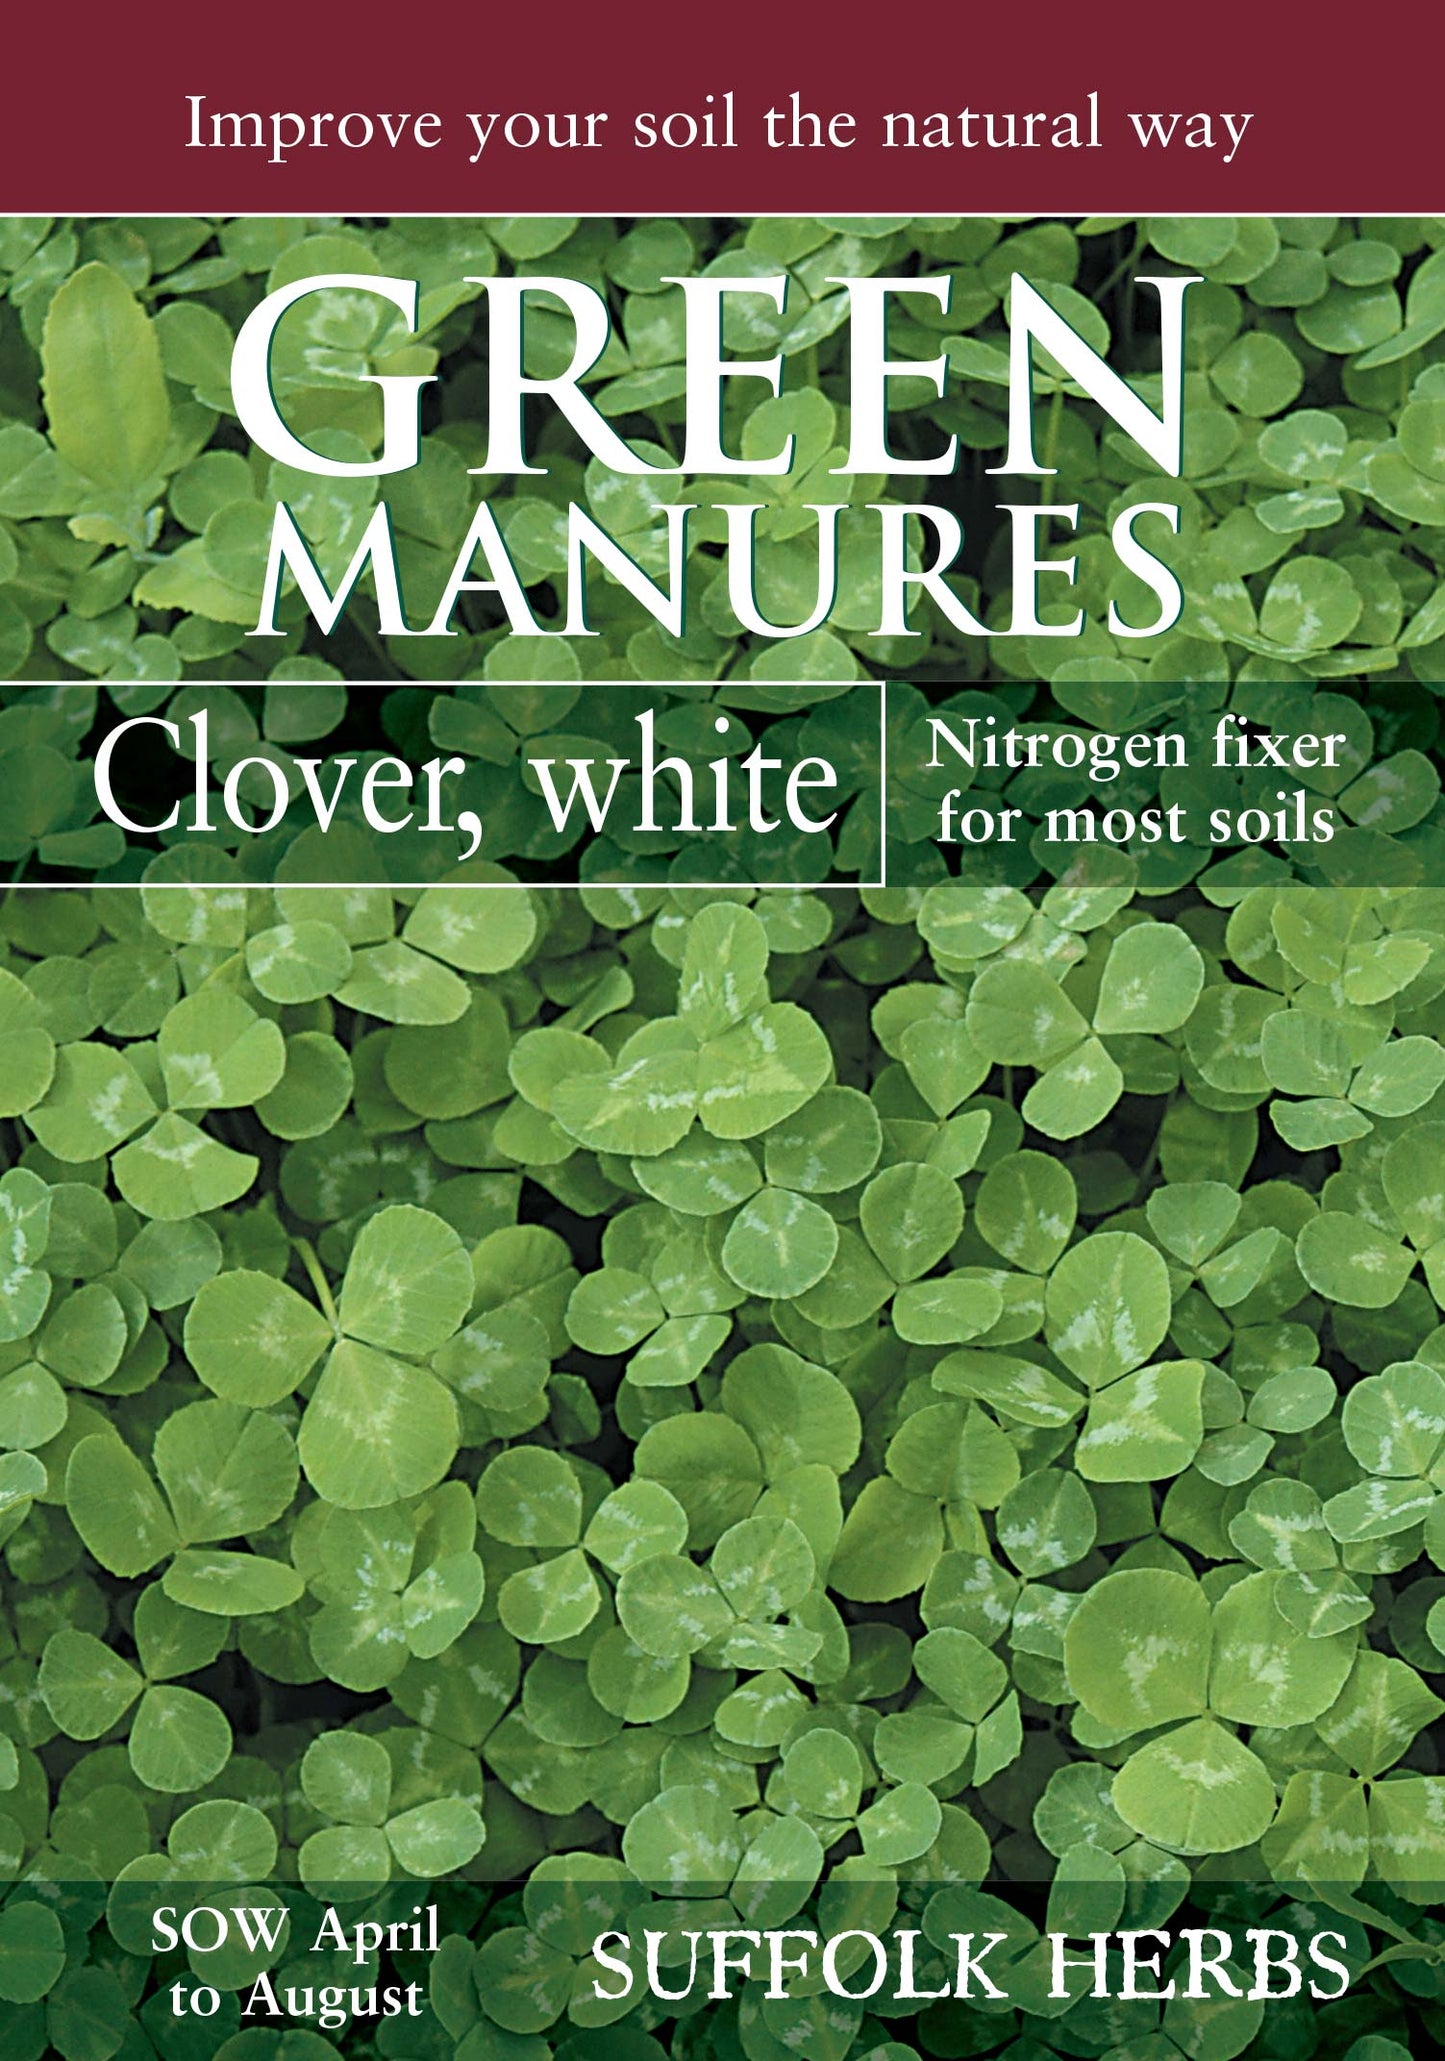 Kings Seeds Green Manure White Clover 90g Seeds